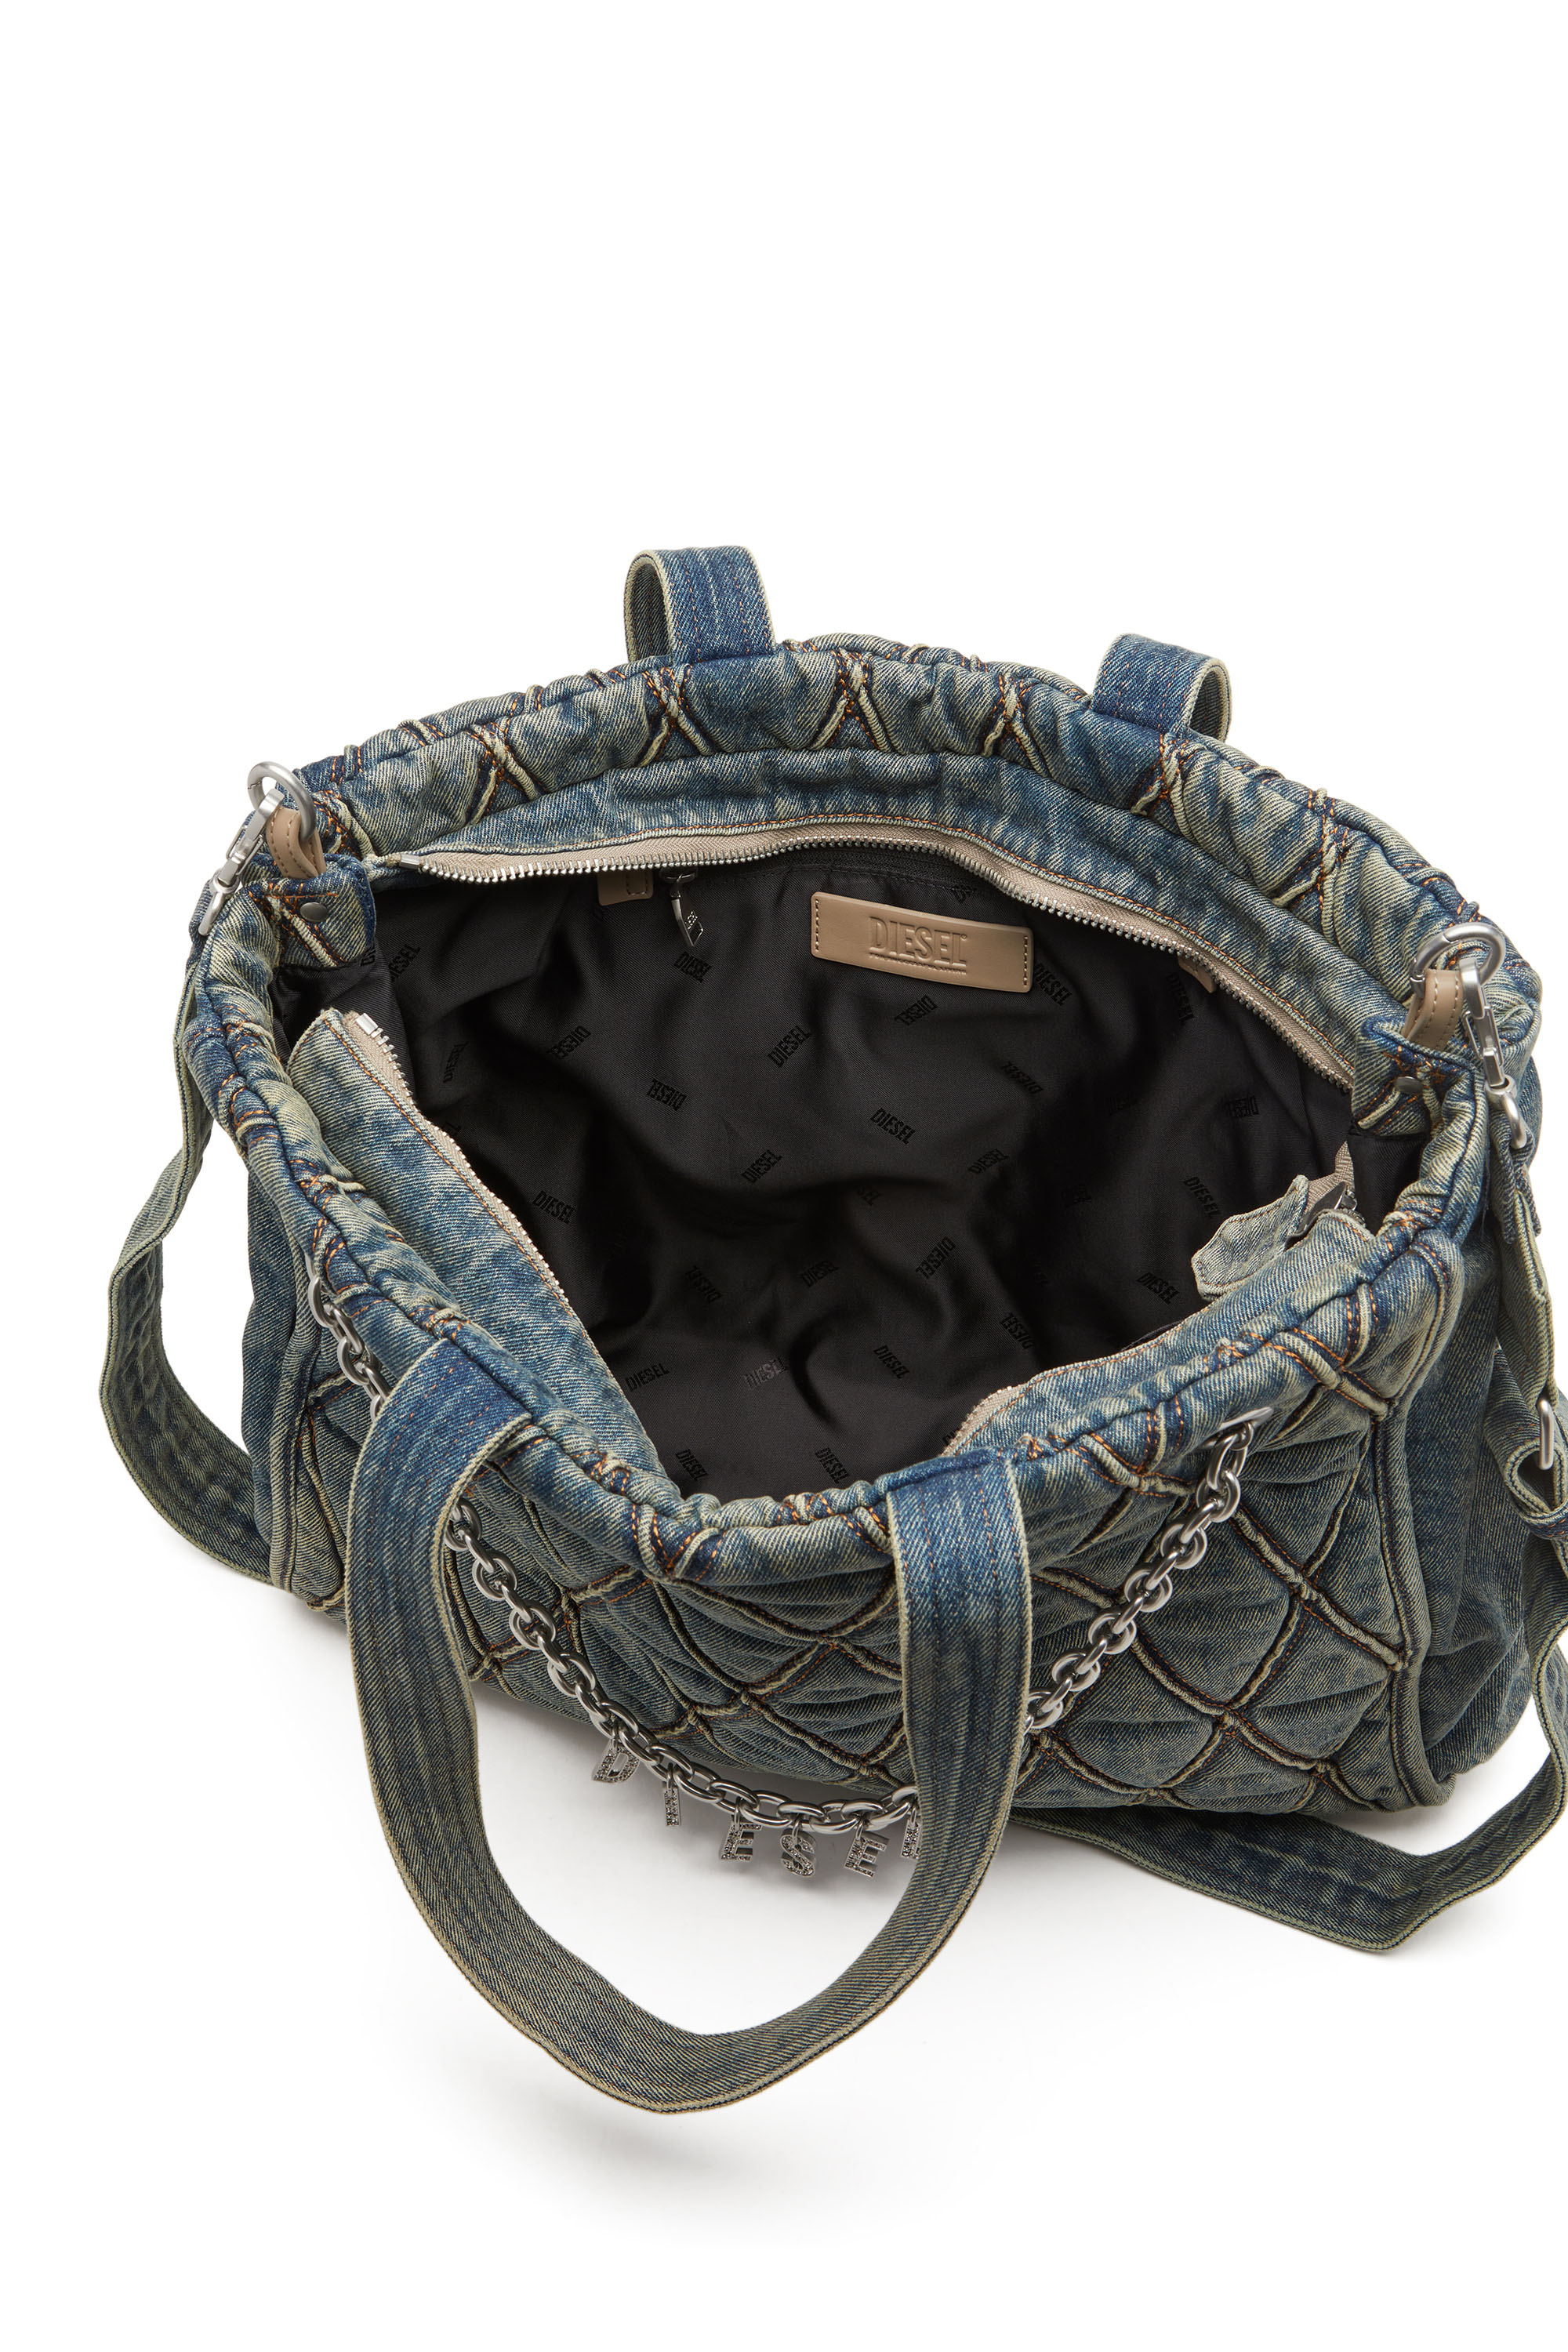 Diesel - CHARM-D SHOPPER, Female Charm-D-Tote bag in Argyle quilted denim in Blue - Image 4